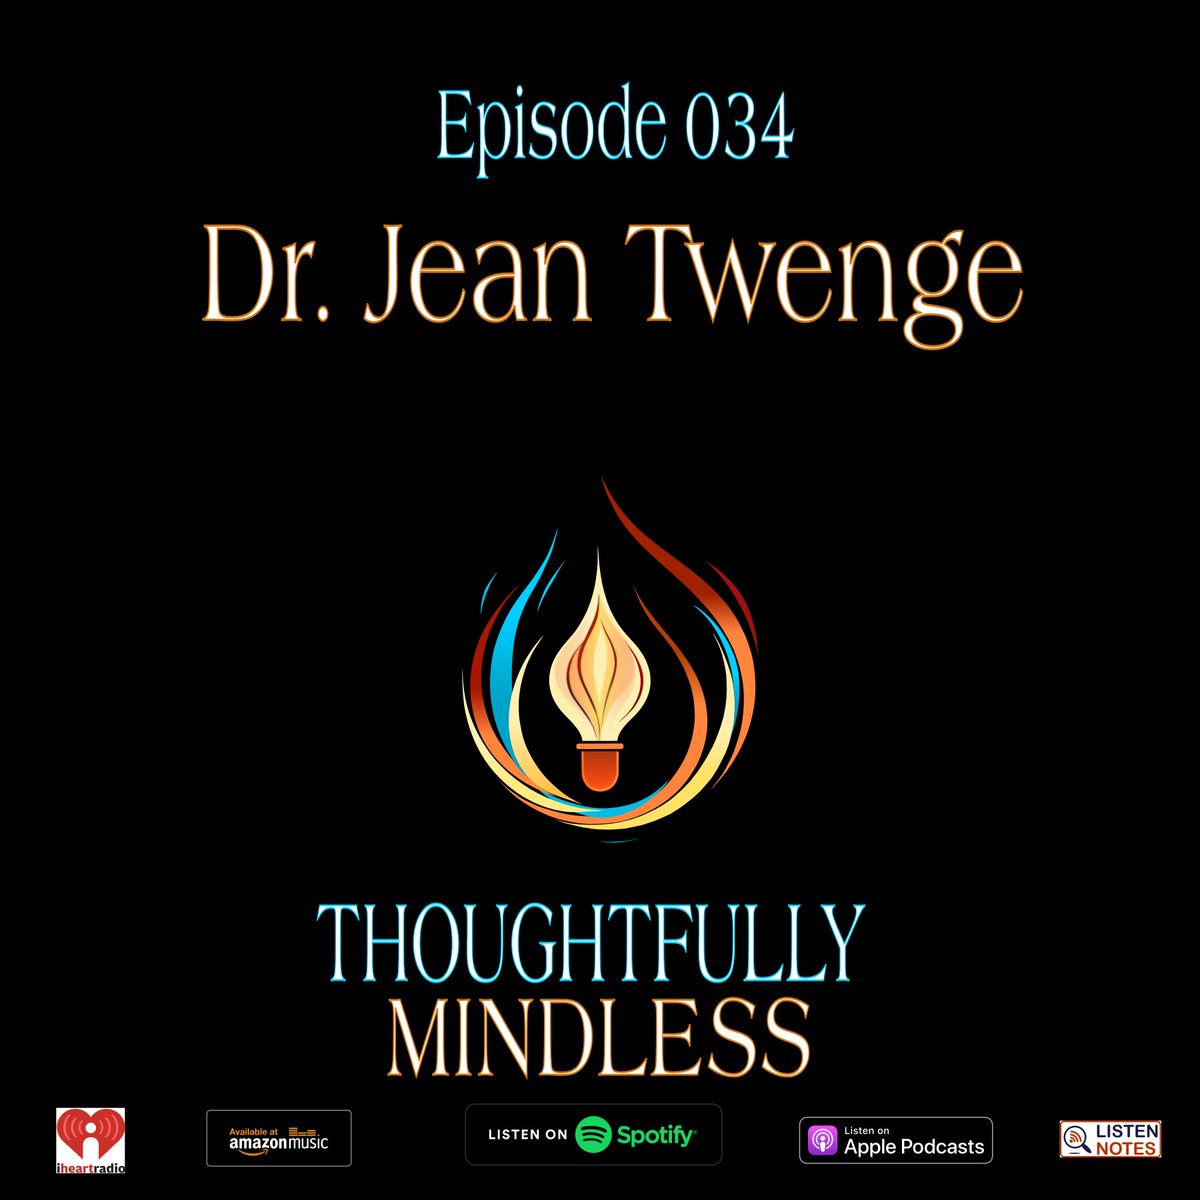 New episode of Thoughtfully Mindless, featuring @jean_twenge, available now on all podcast streaming platforms! We talk all about generational differences, which are covered extensively in her latest book, Generations. I hope you all enjoy the conversation!